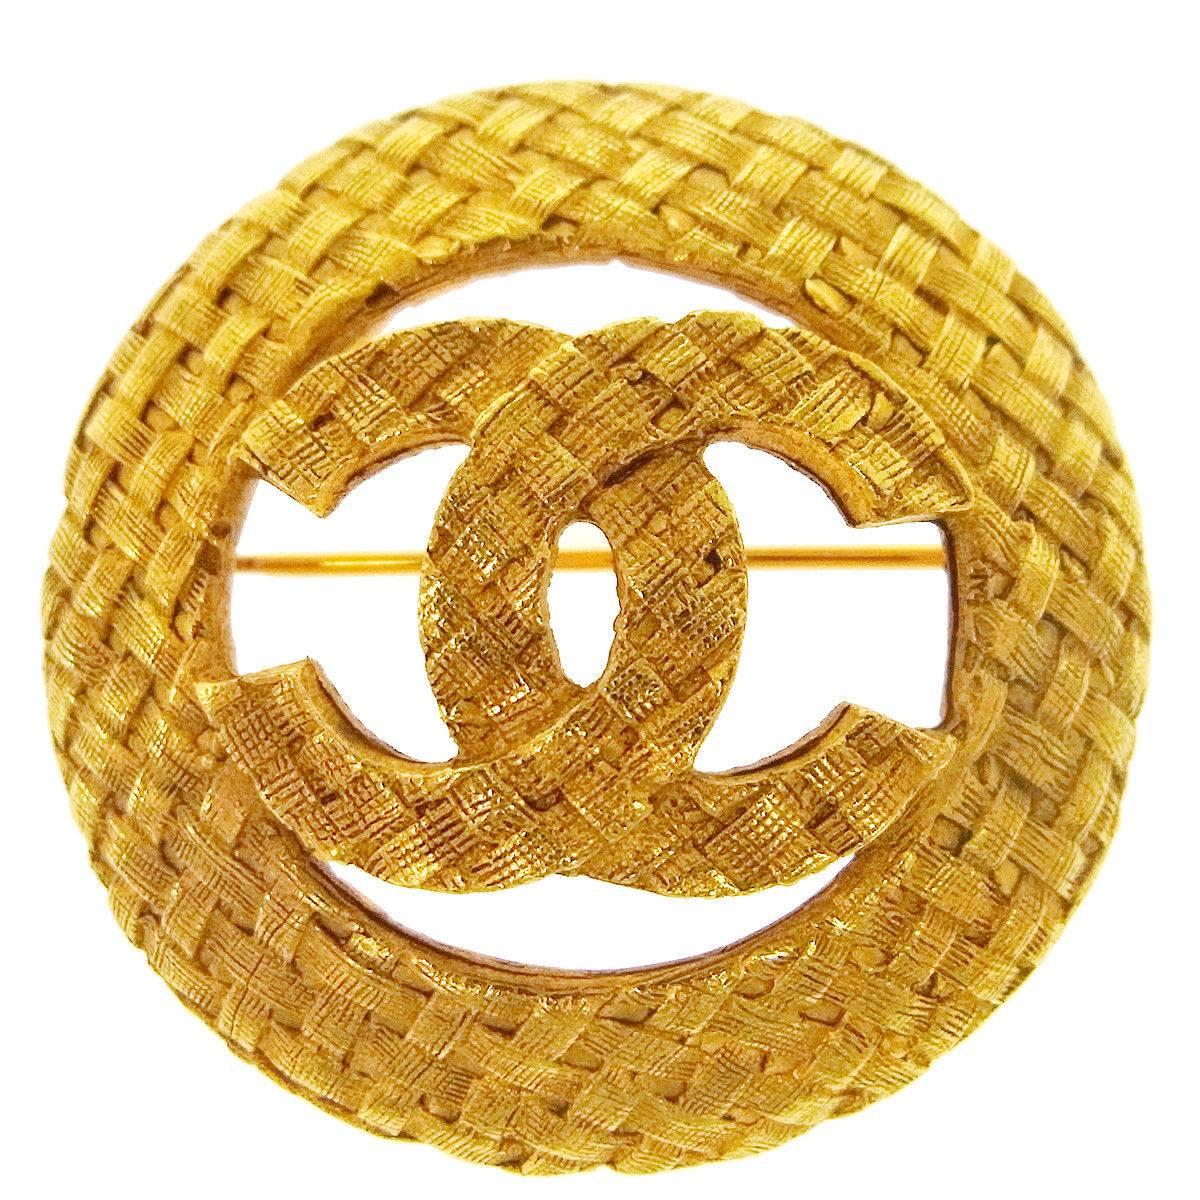 Chanel Gold Textured Logo Round Evening Pin Brooch in Box